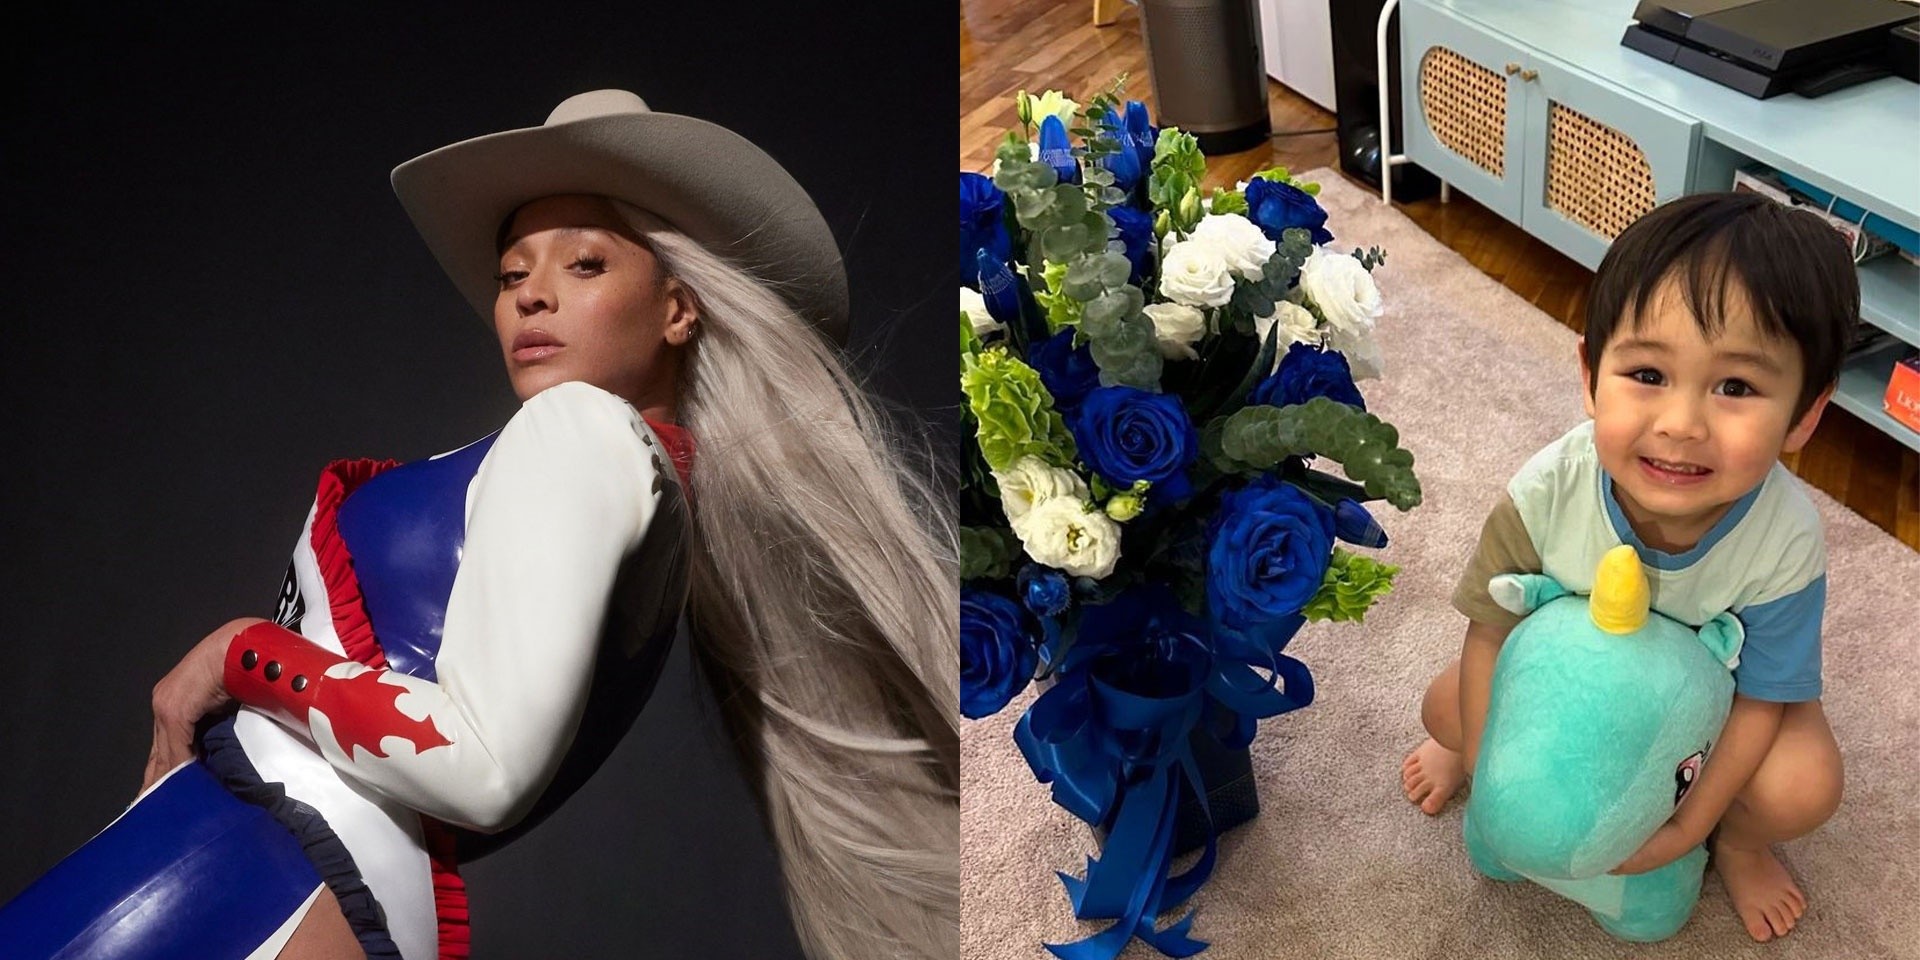 Beyoncé sends 2-year-old Filipino fan blue flowers and plushie after viral video: "To my friend Tyler"